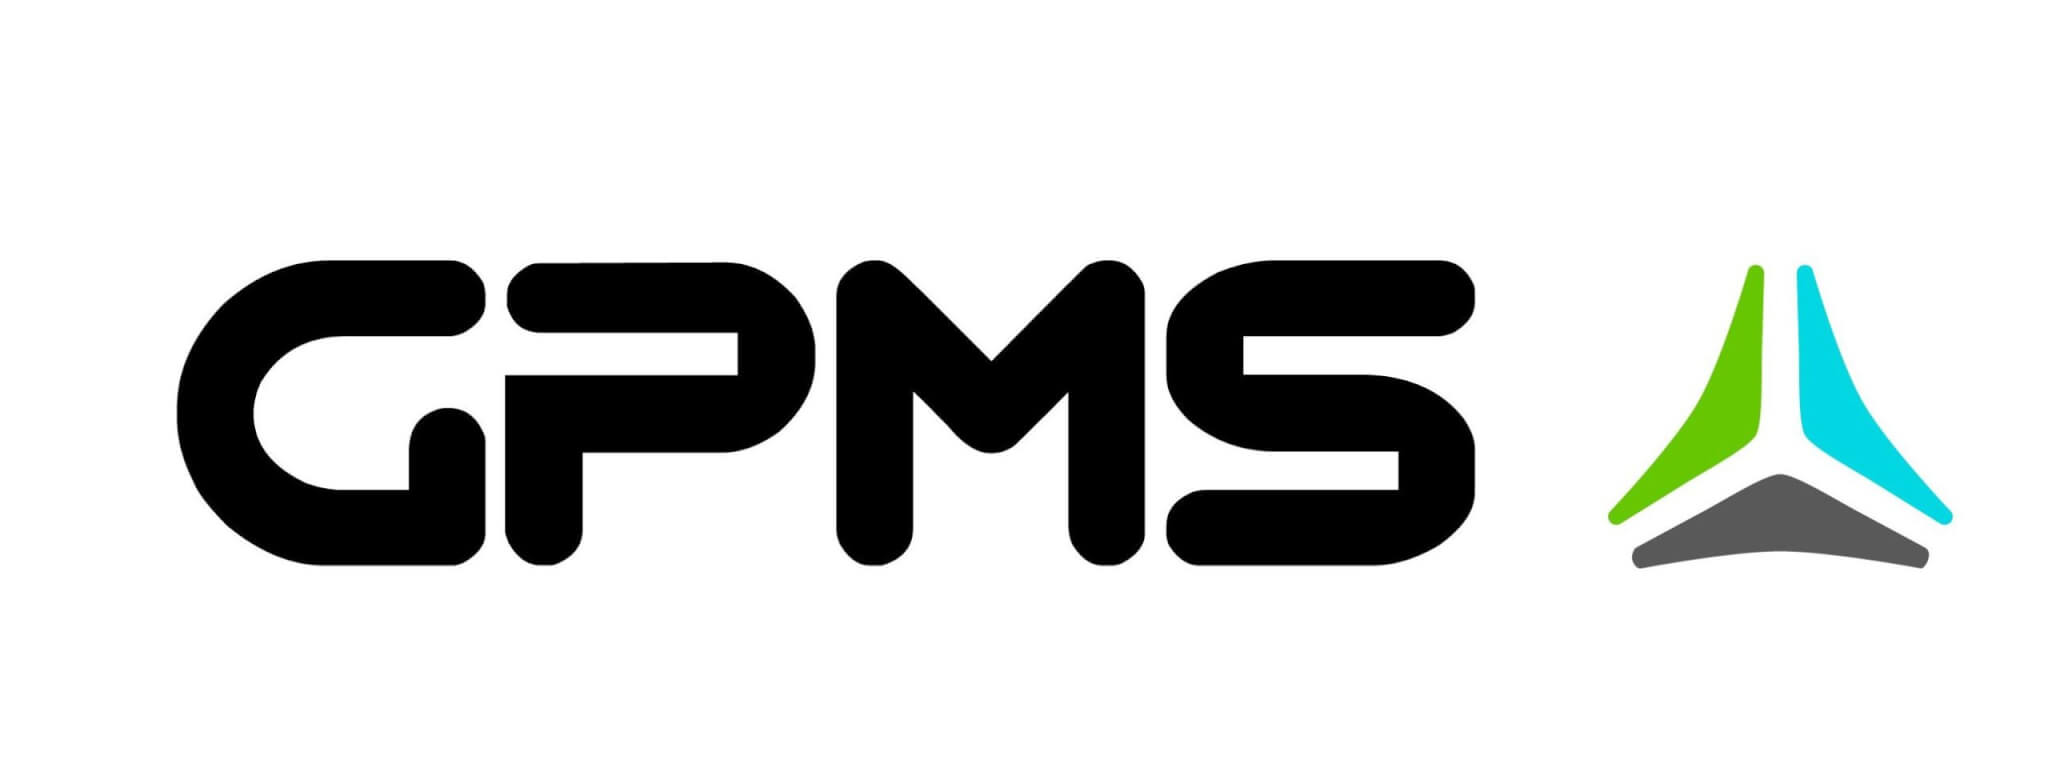 GPMS’ Predictive HUMS Foresight MX Gains Patent Protection For Novel Remaining Useful Life RUL Algorithm